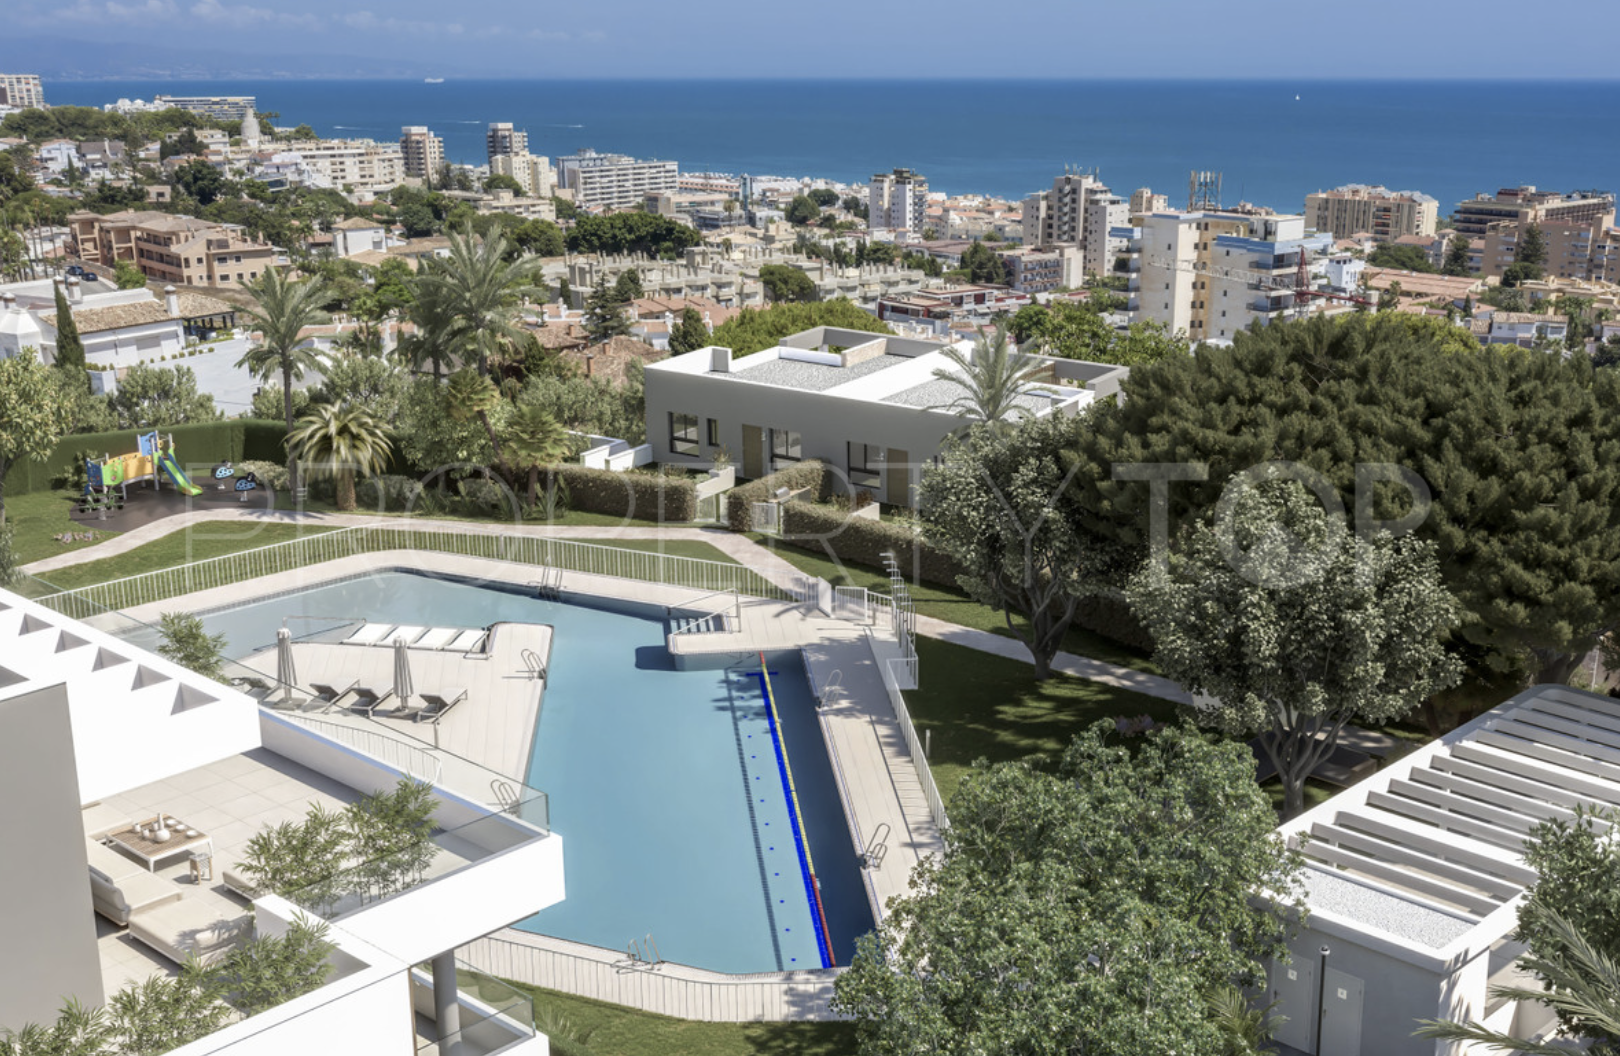 Apartment for sale in Torremolinos with 3 bedrooms